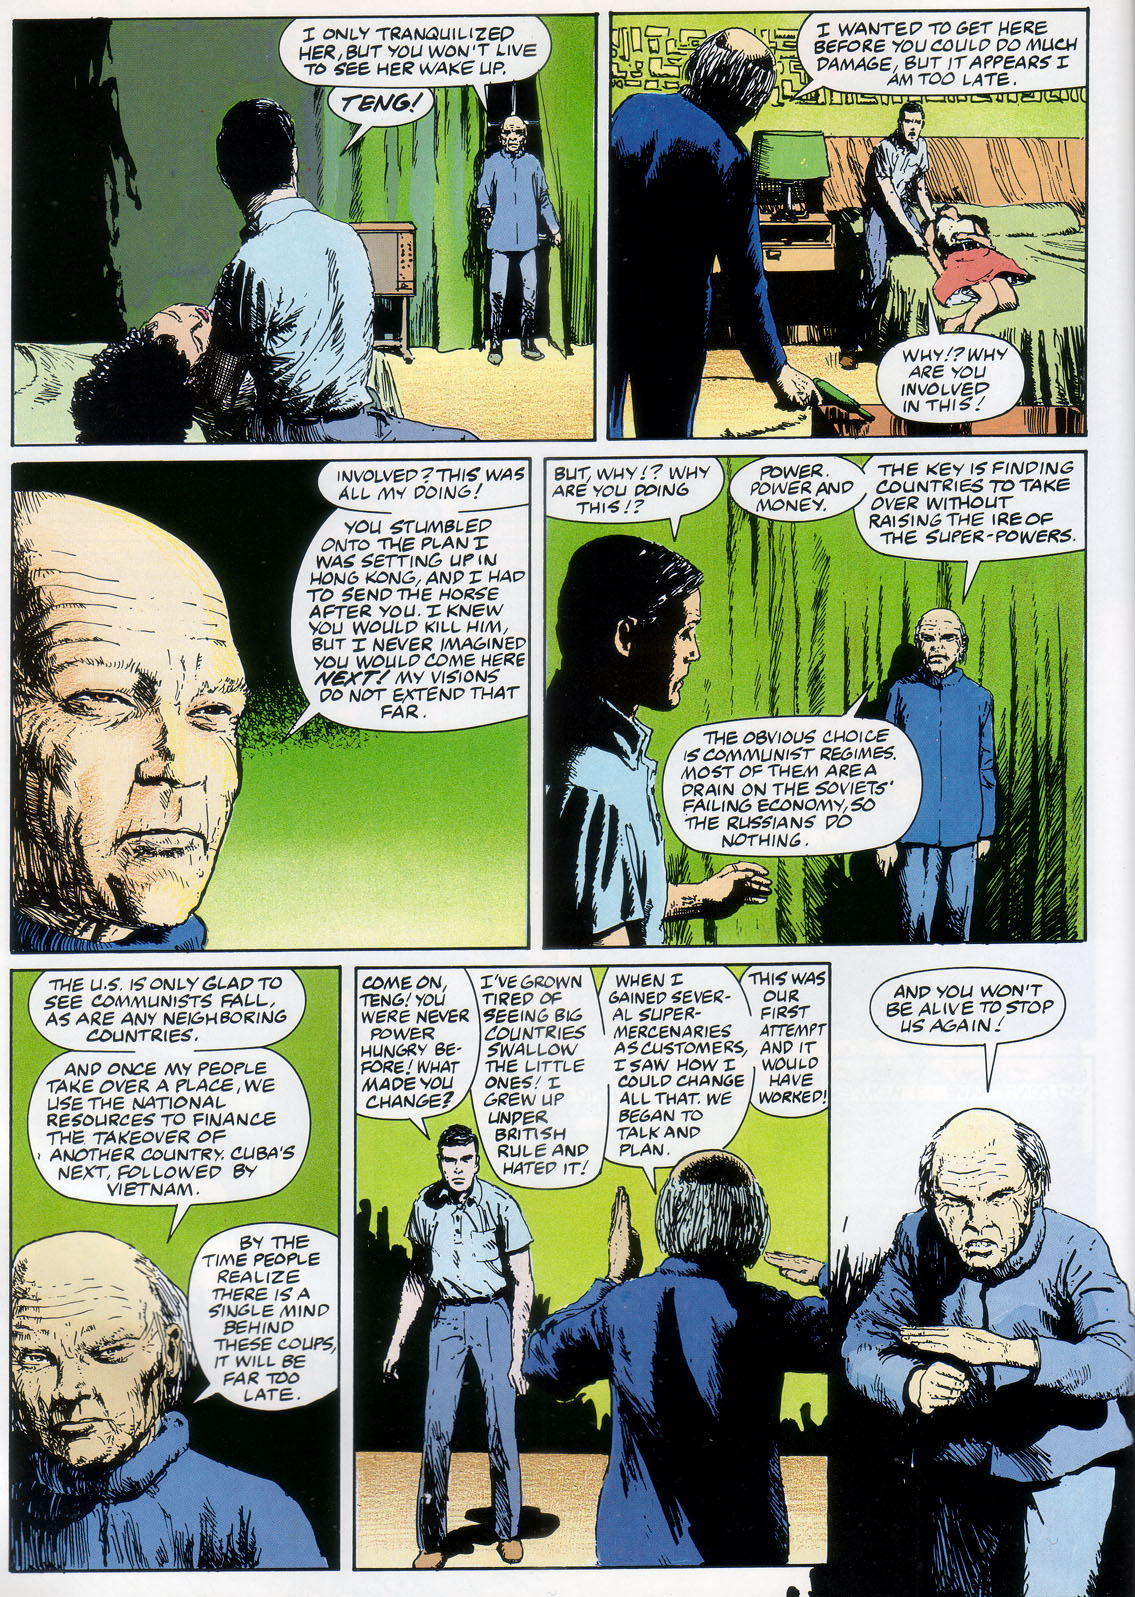 Marvel Graphic Novel issue 57 - Rick Mason - The Agent - Page 76